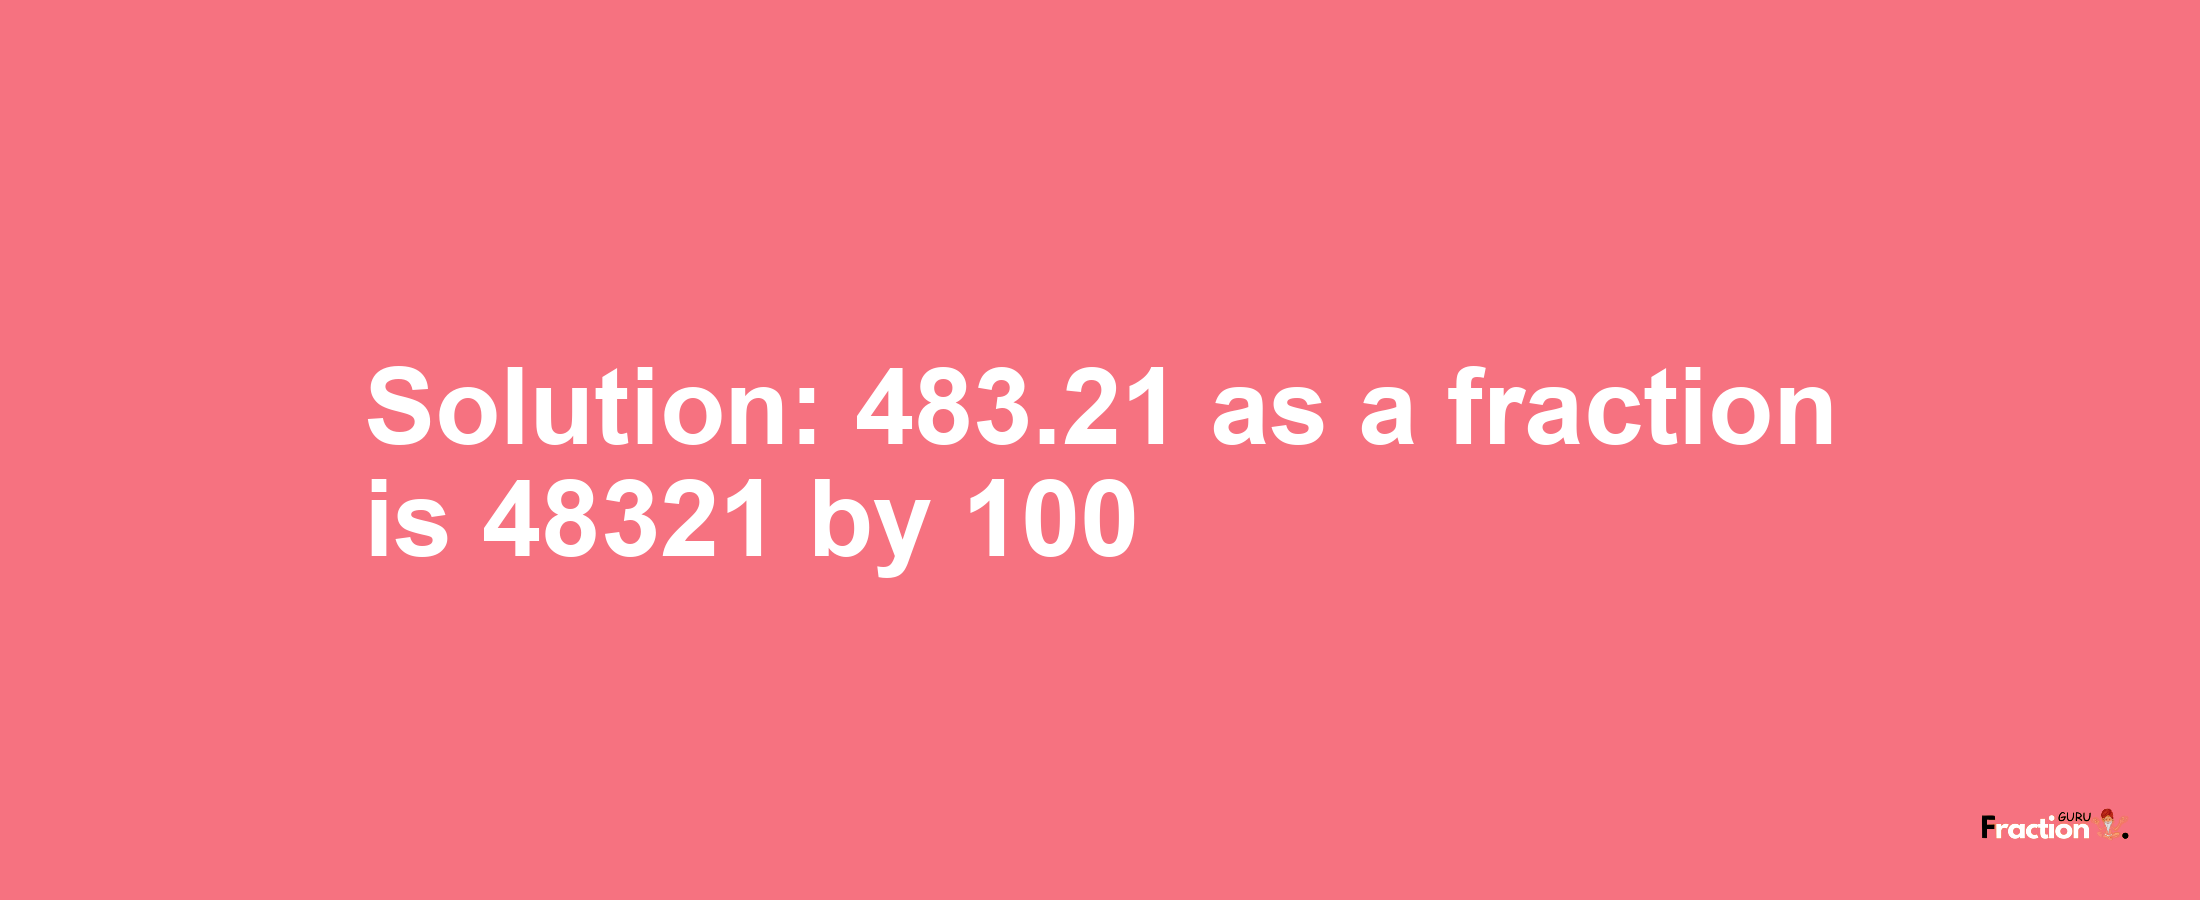 Solution:483.21 as a fraction is 48321/100